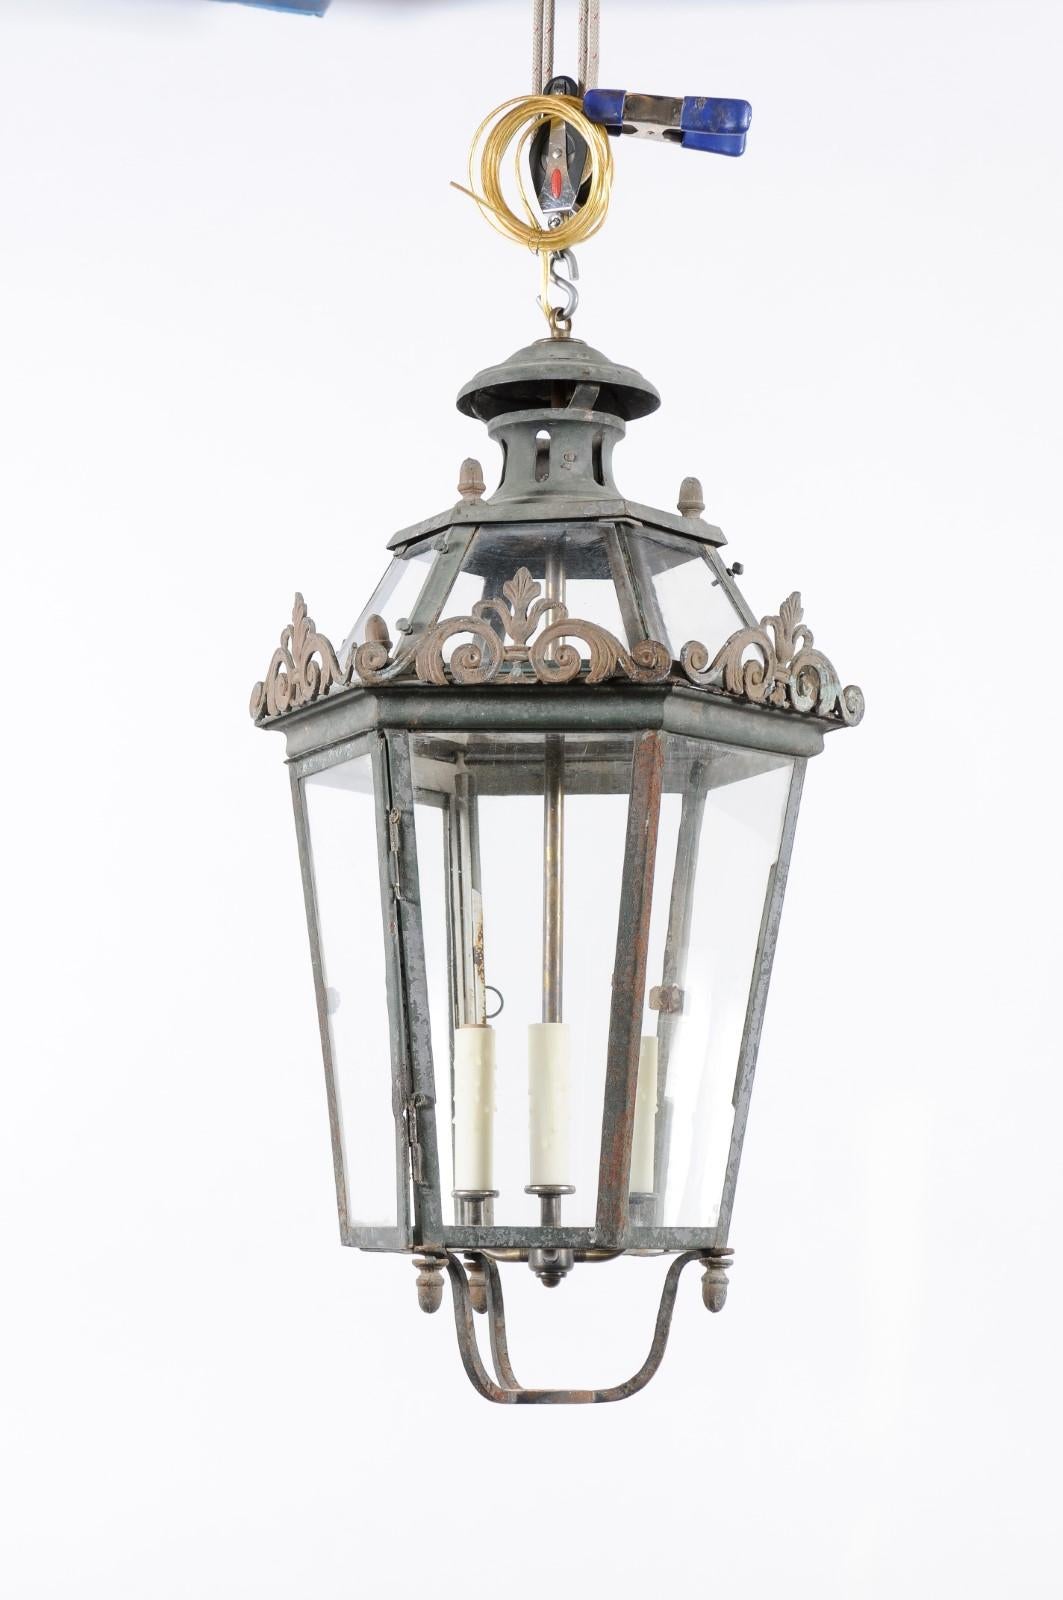  Venetian Painted Iron Street Lantern with 3 Lights, Late 19th Century For Sale 4